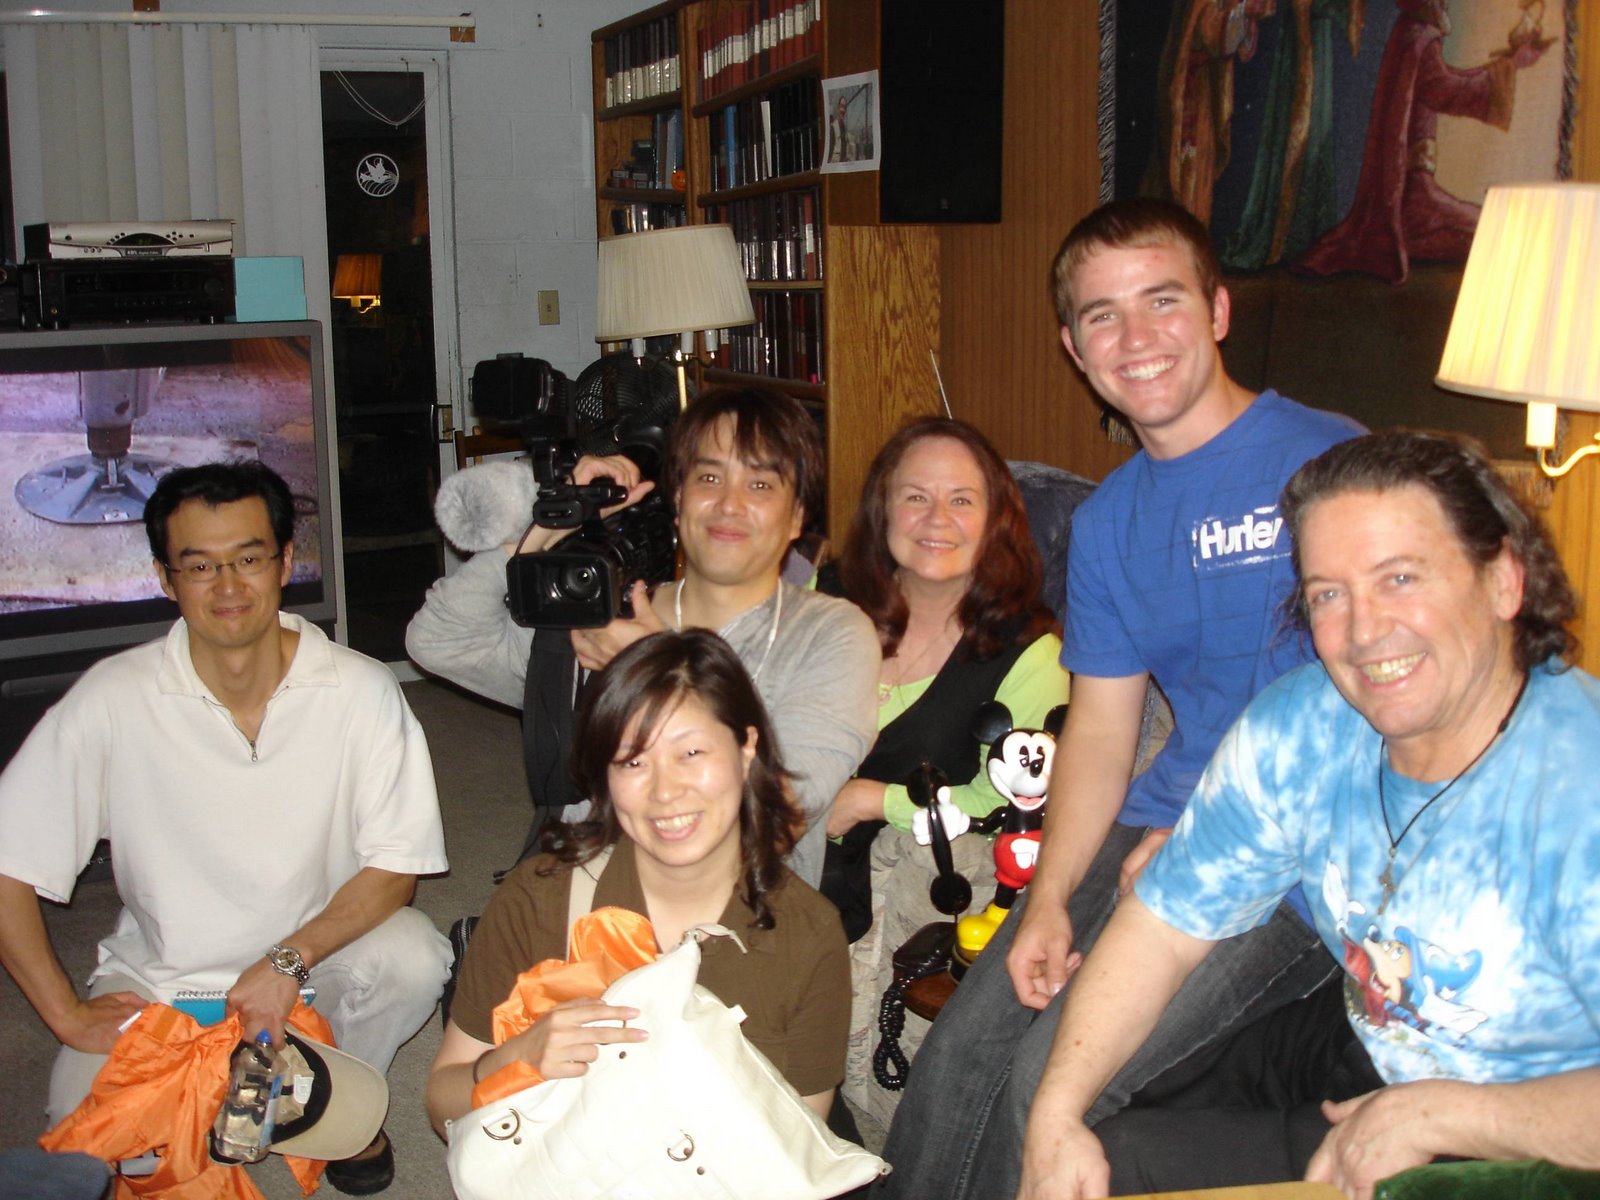 [Ley+family+with+Nippon+TV+crew+8-11-07.jpg]